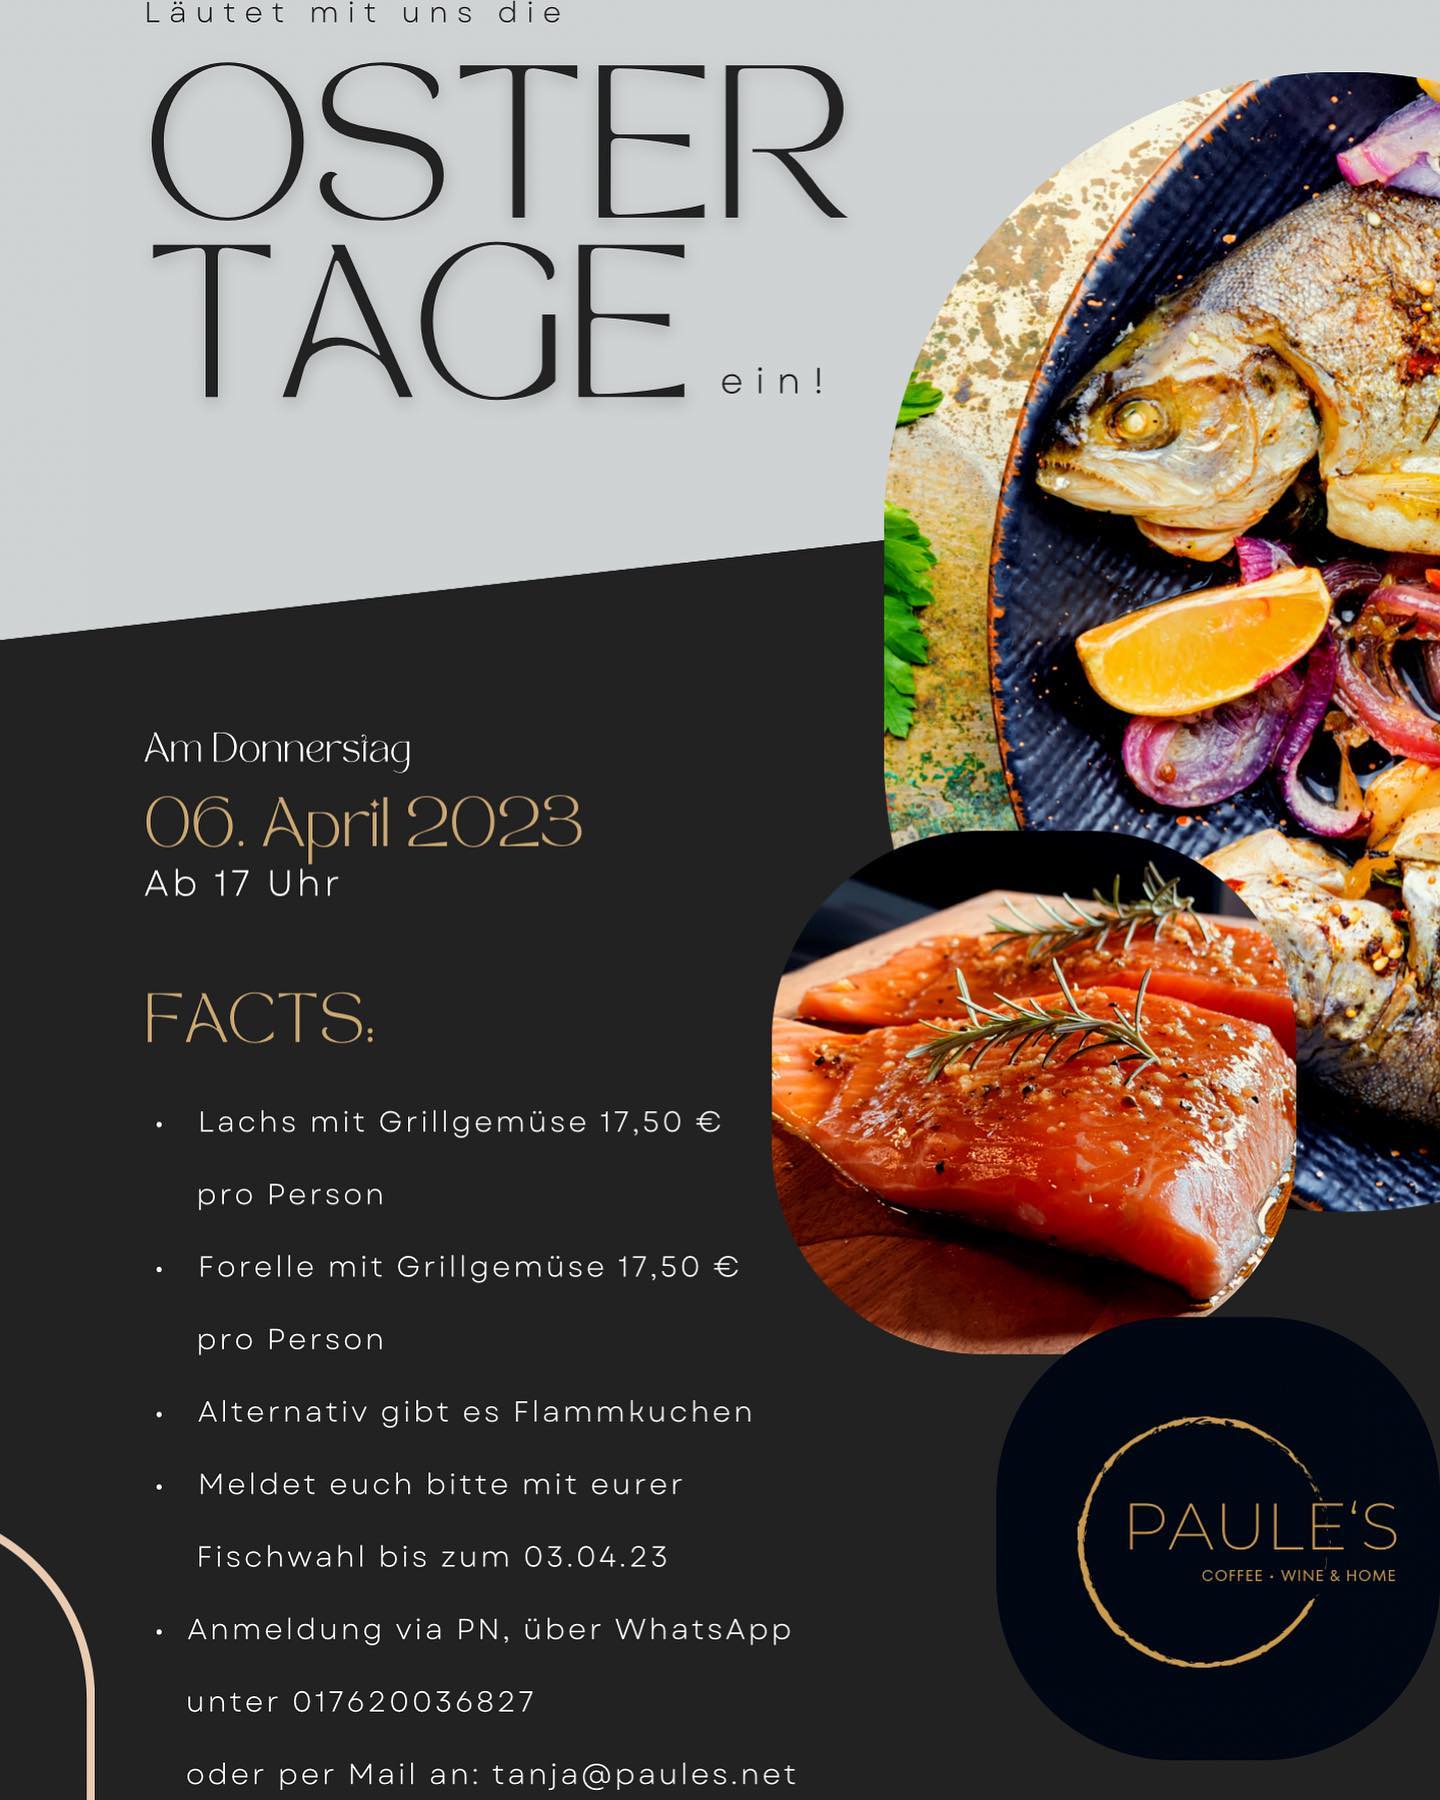 Ostertage bei PAULE’S